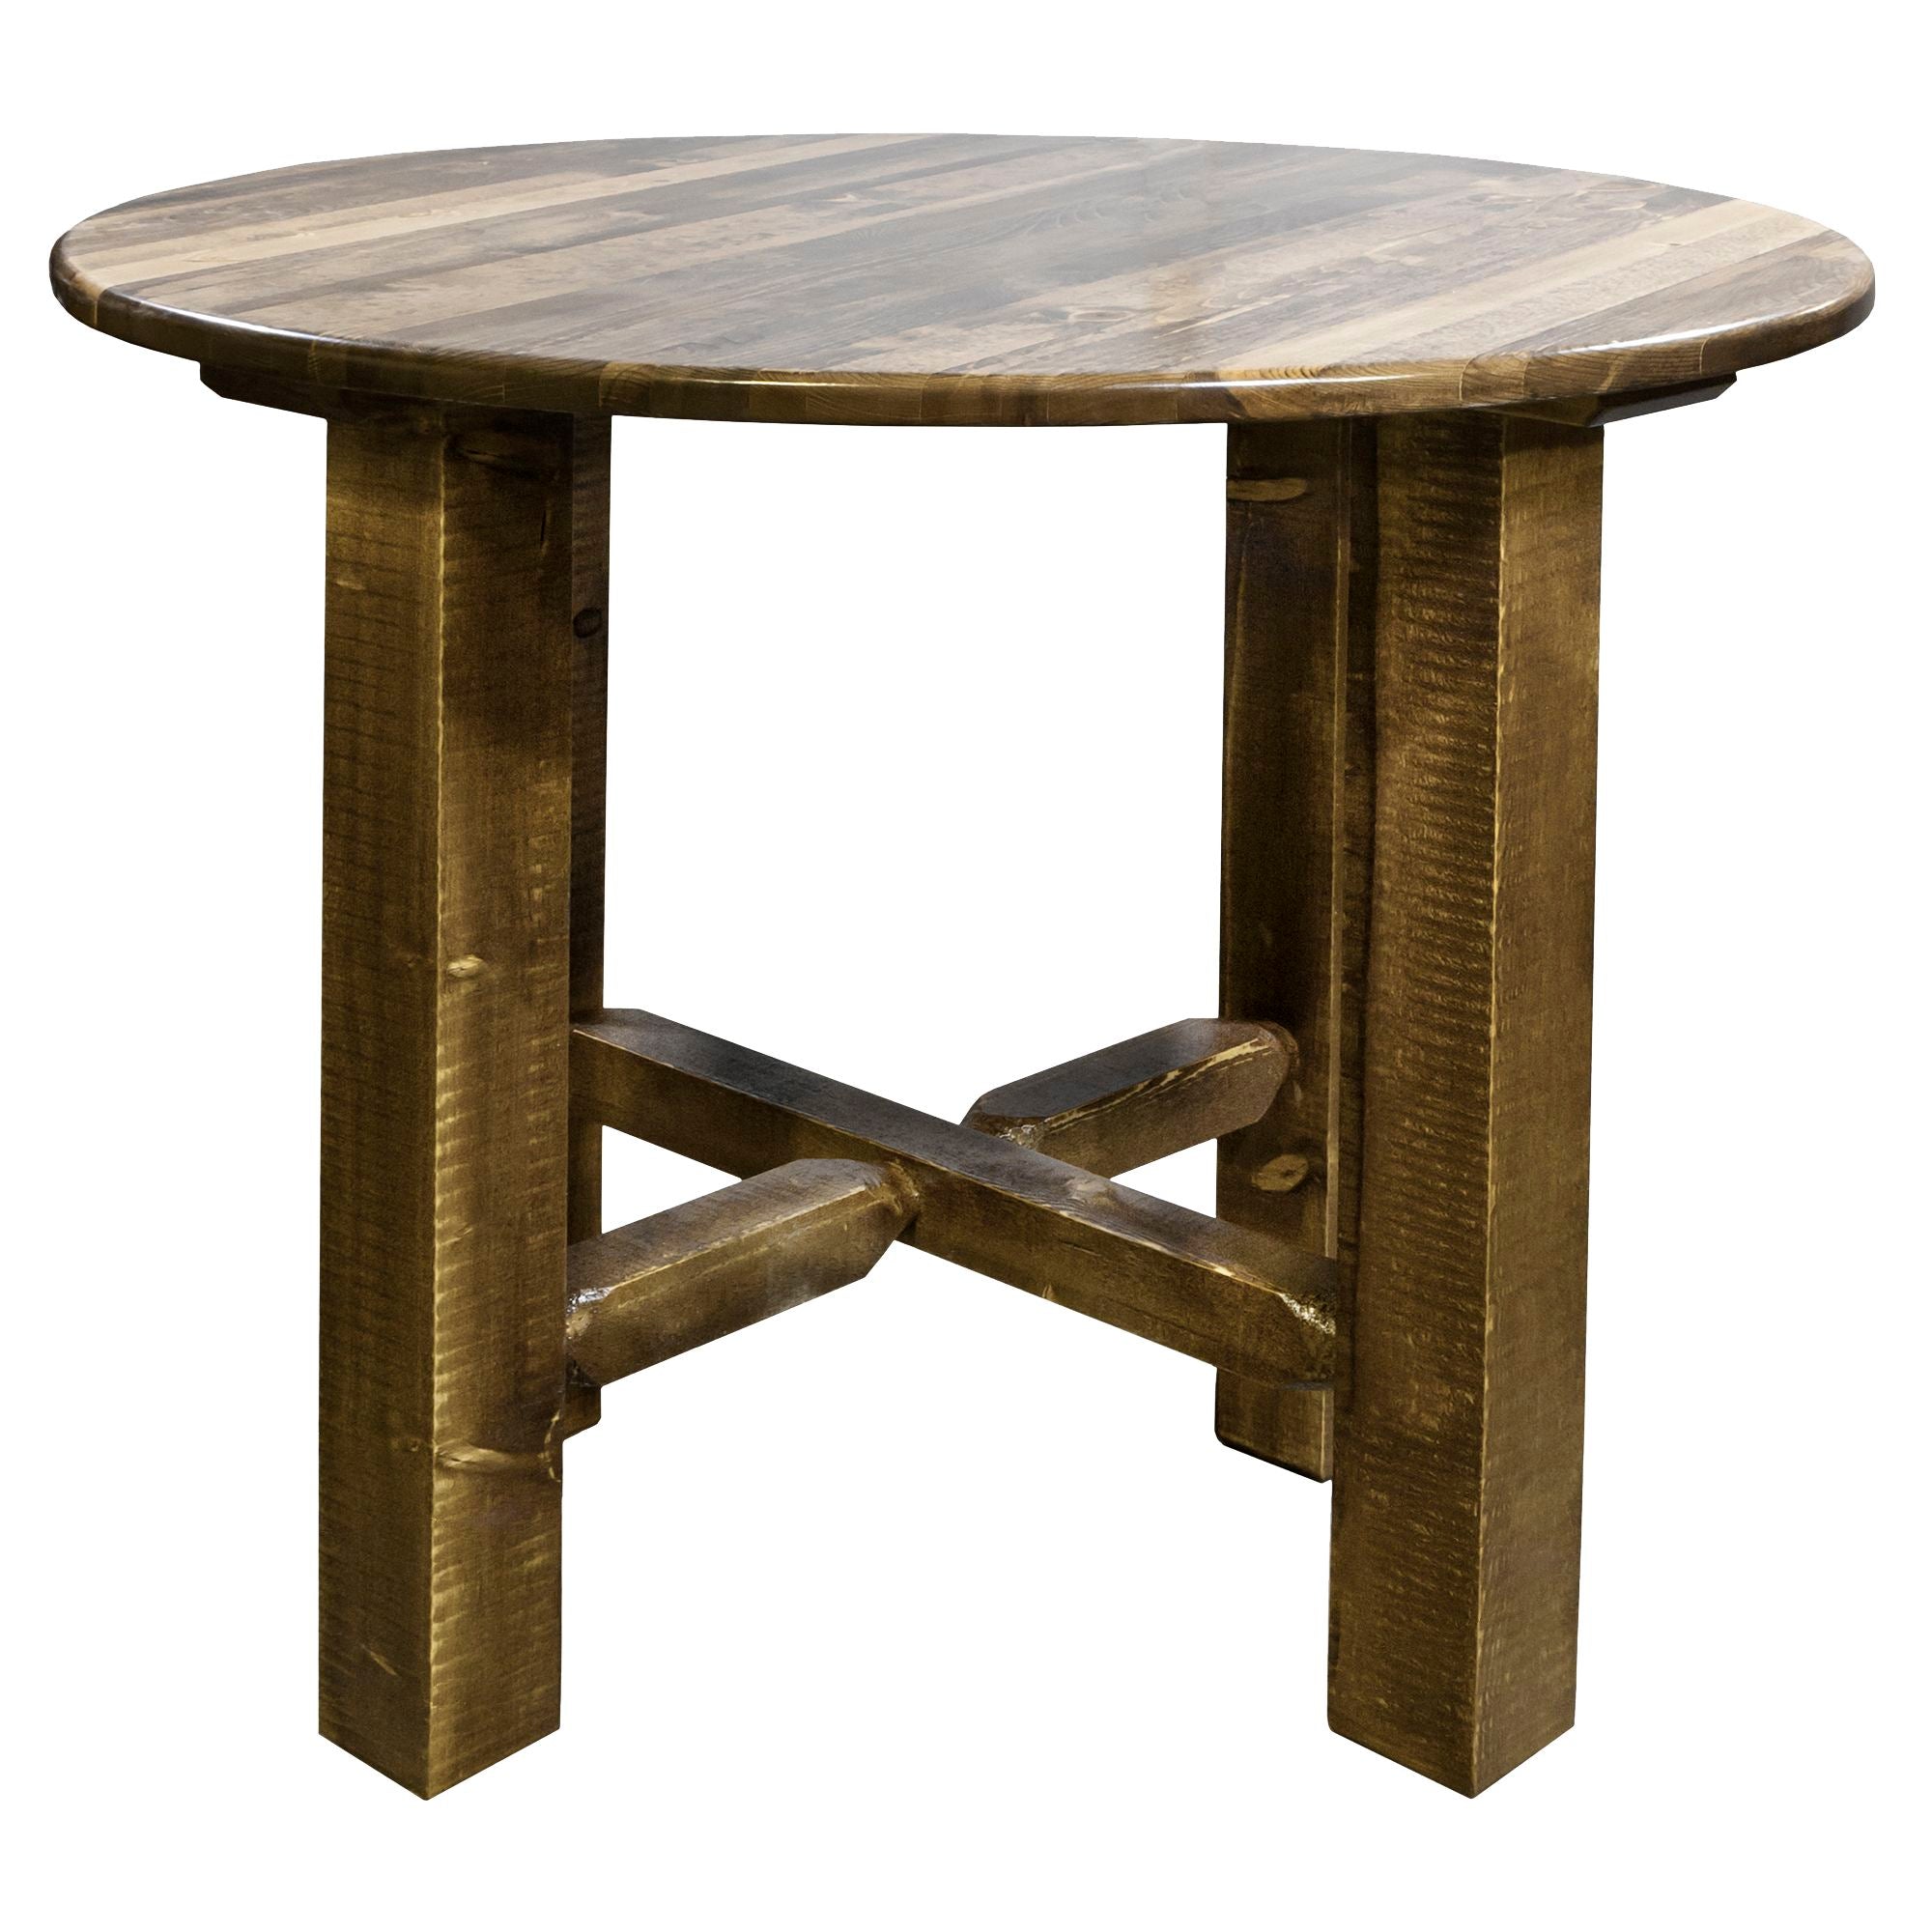 Montana Homestead Collection Bistro Table Stain Lacquer Finish MWHCBTSL36 Round 36inches